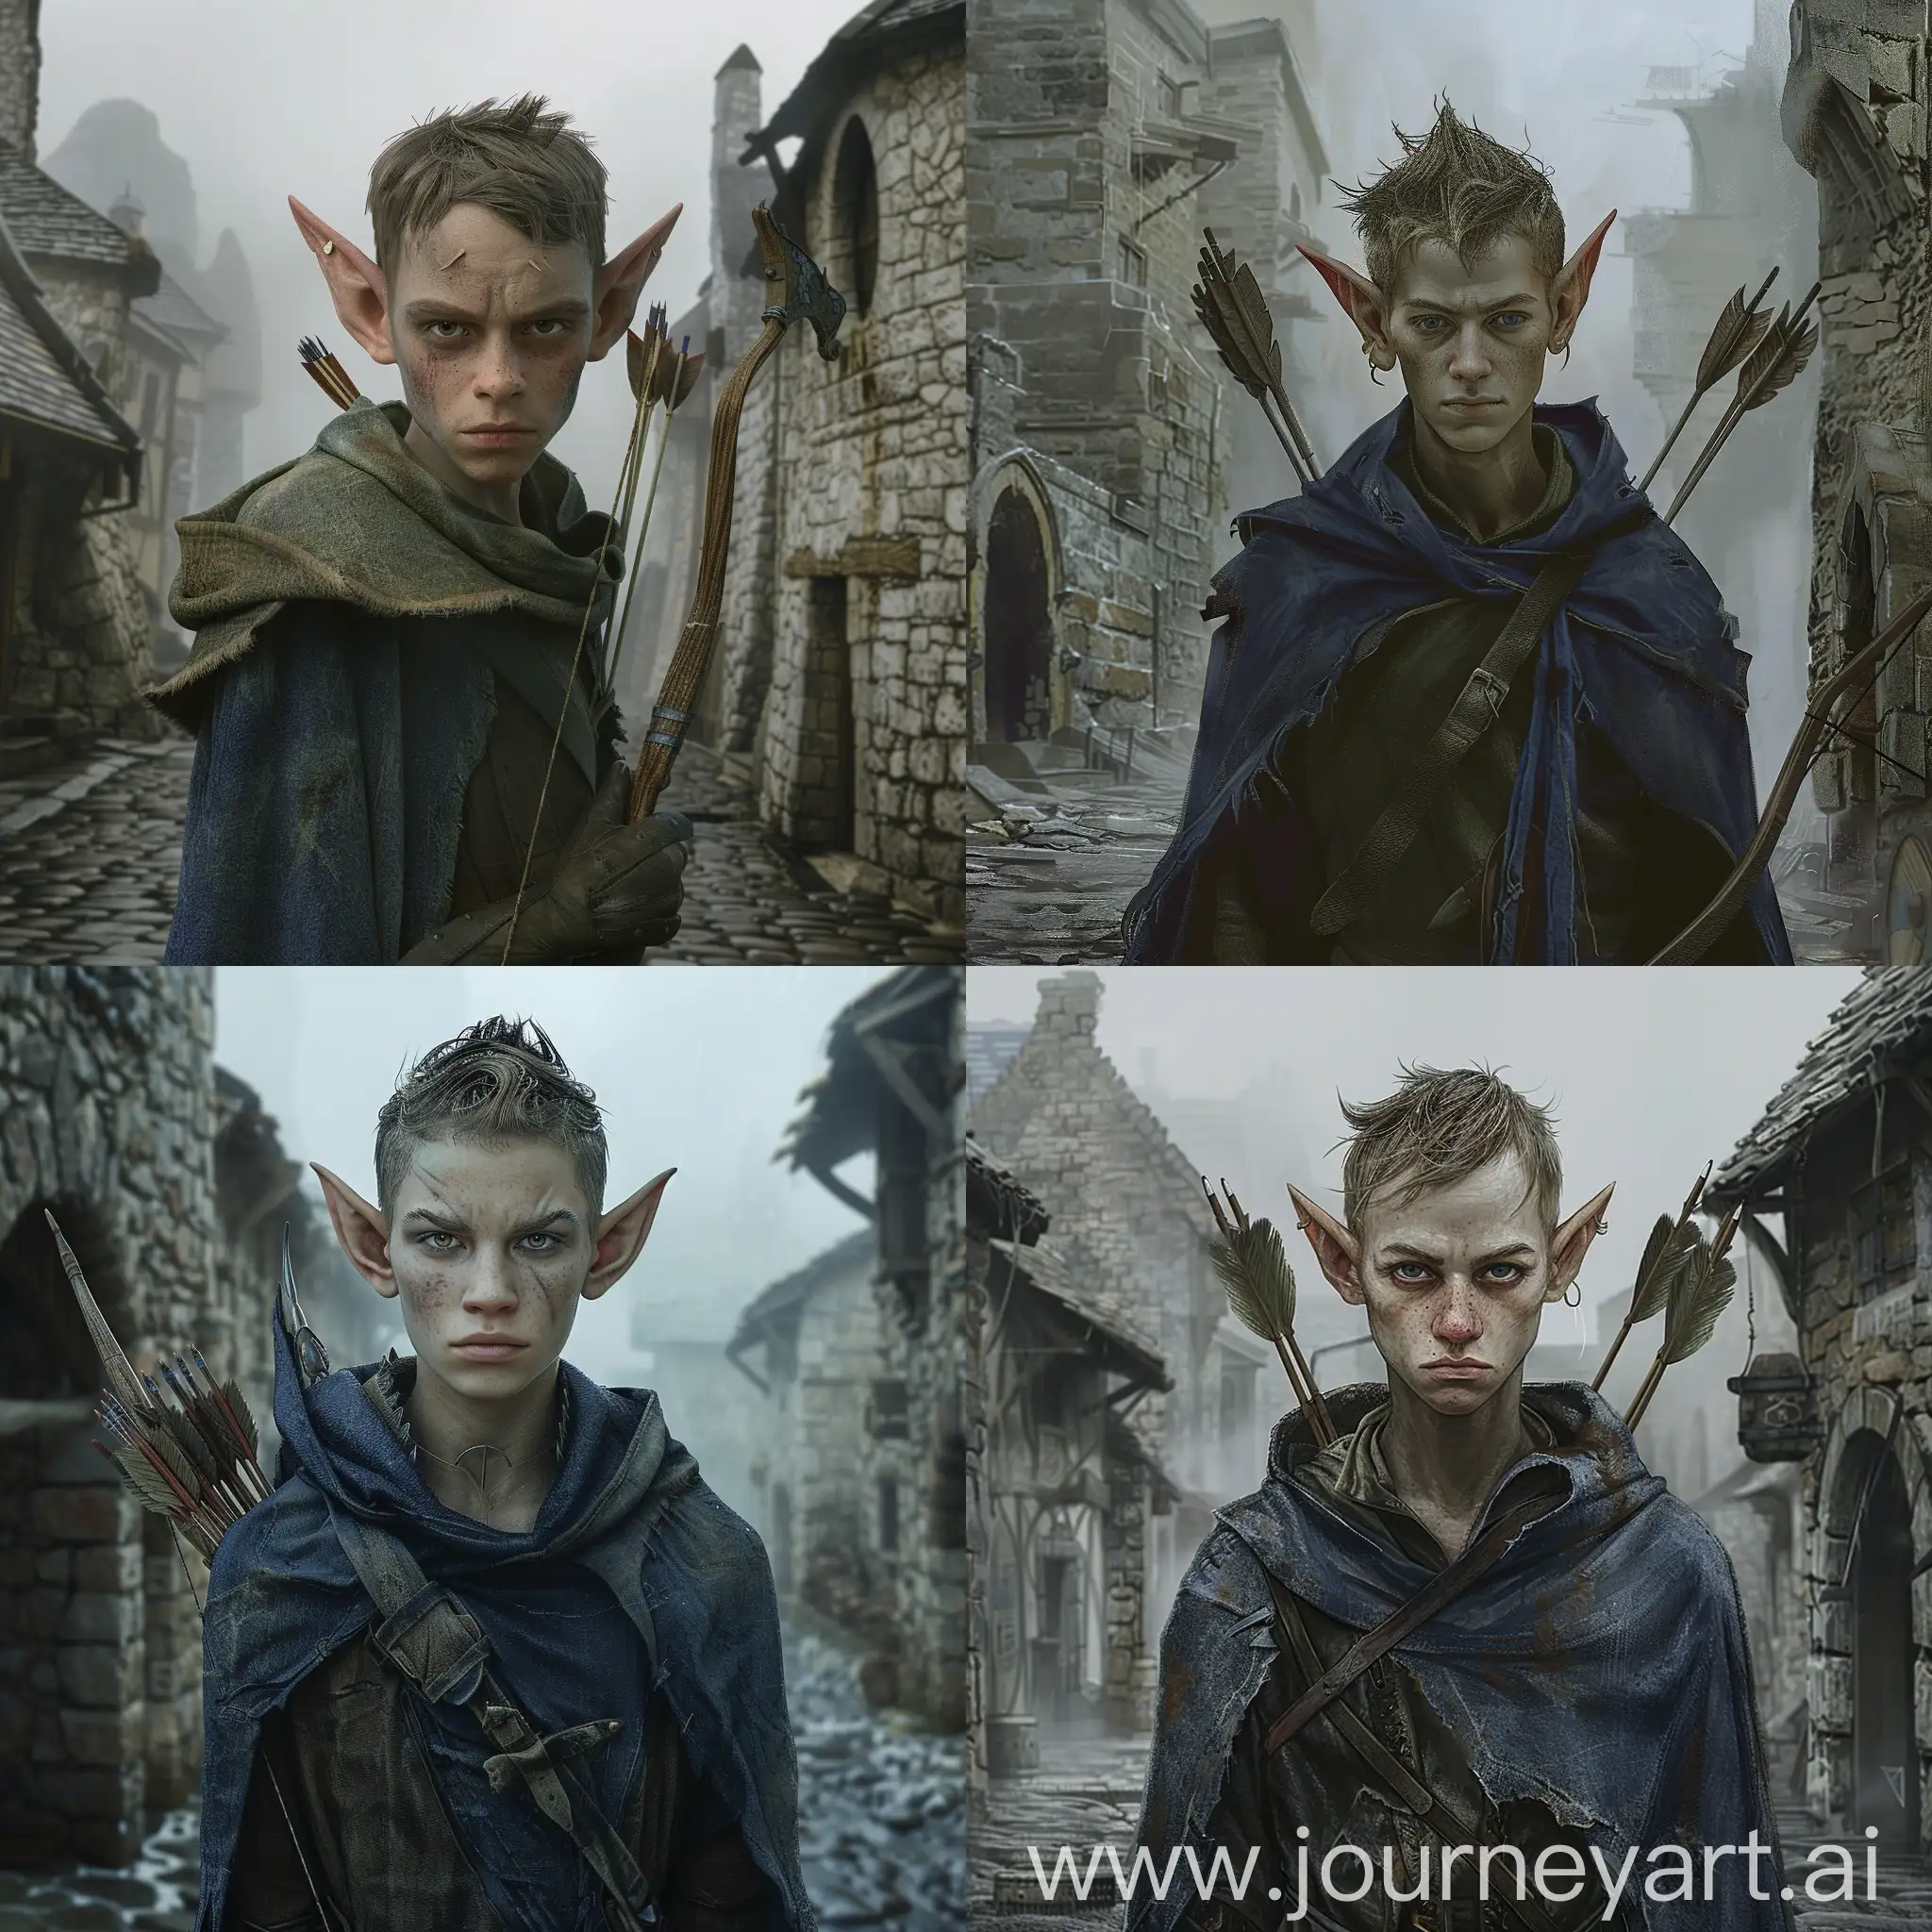 A young, handsome and thin elf with pointed ears, expressive cheekbones, thin cheeks and a pointed chin. He has a wary expression on his face. He is wearing a worn dark blue cloak with the hood pulled down, and he has a bow and a quiver of arrows on his back. It stands in the middle of a medieval stone town. It's foggy outside and the weather is cloudy. The elf is depicted in full height.